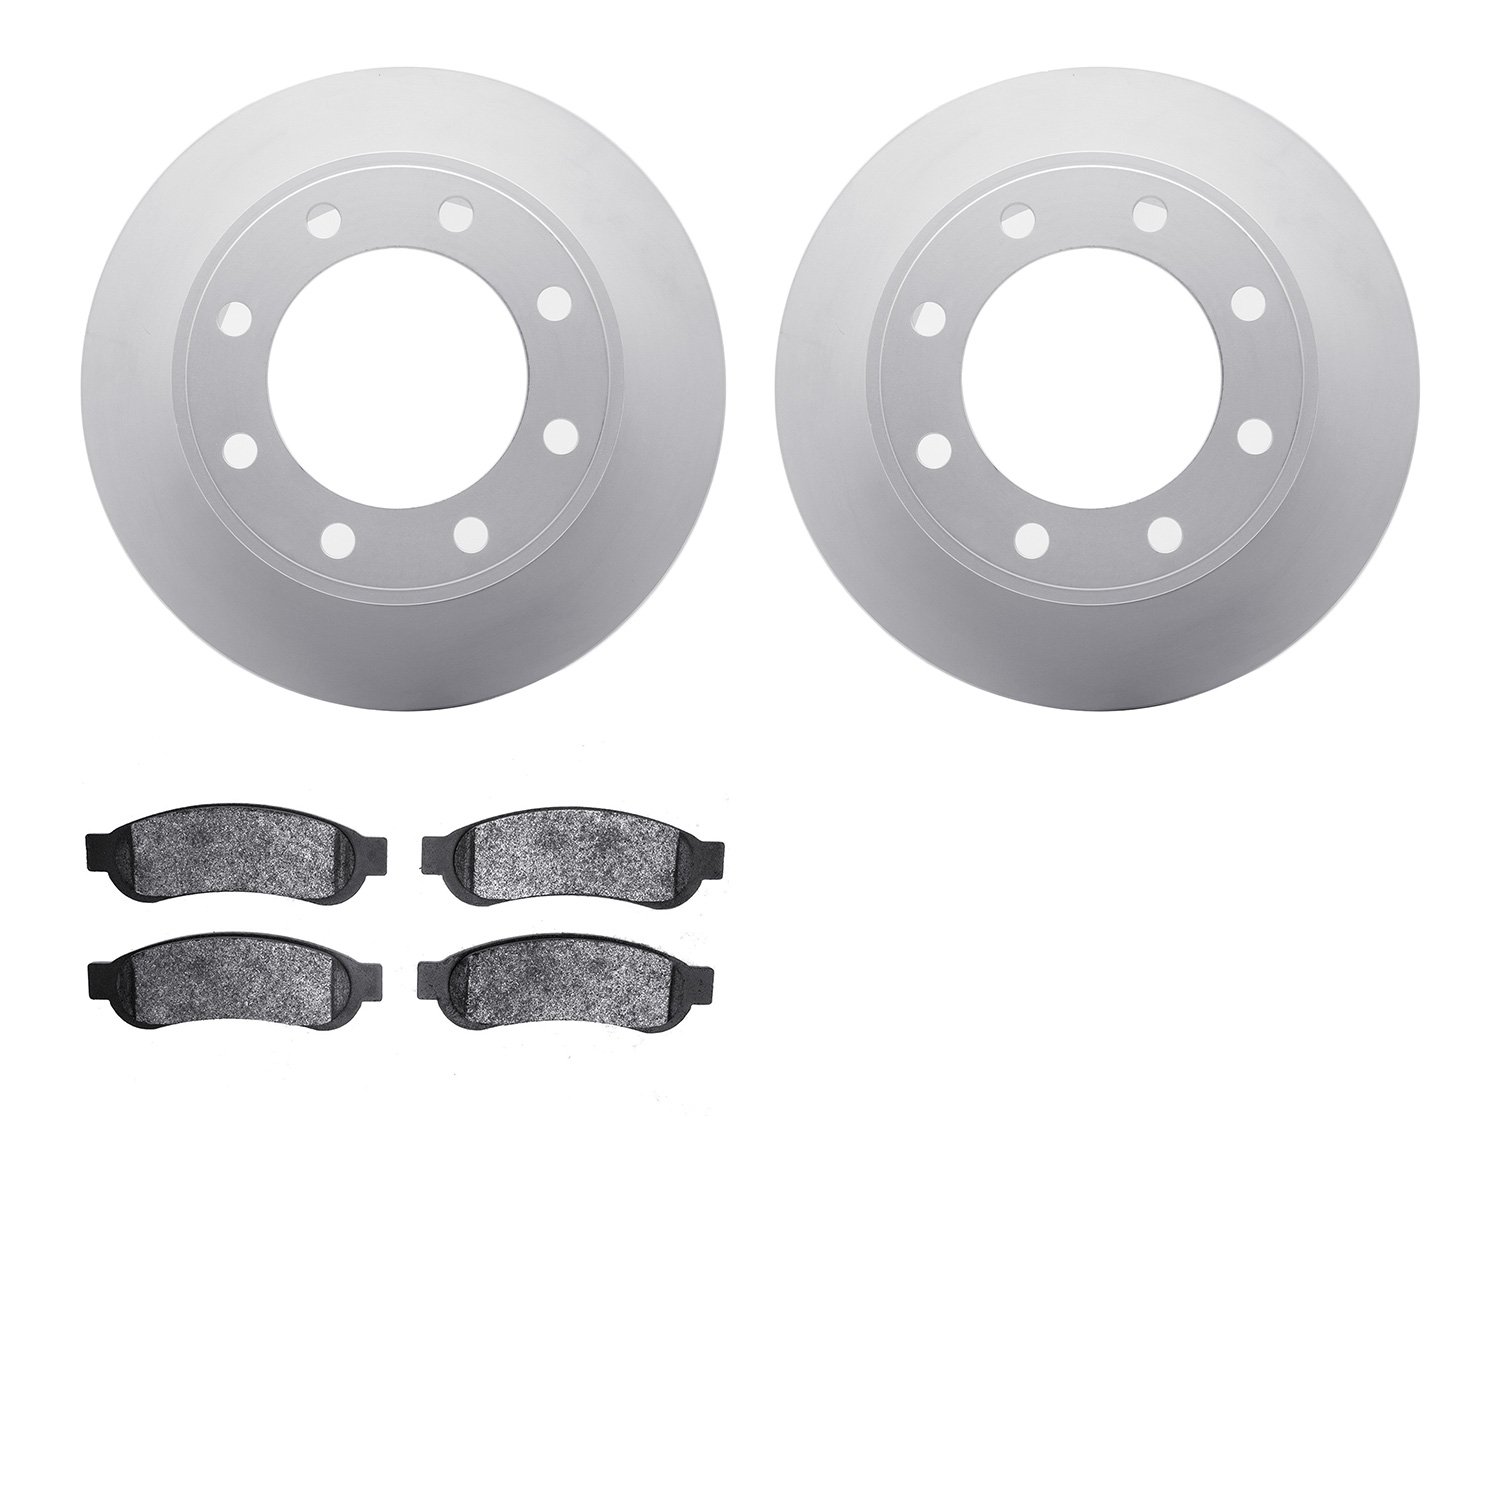 4402-54057 Geospec Brake Rotors with Ultimate-Duty Brake Pads Kit, 2010-2012 Ford/Lincoln/Mercury/Mazda, Position: Rear